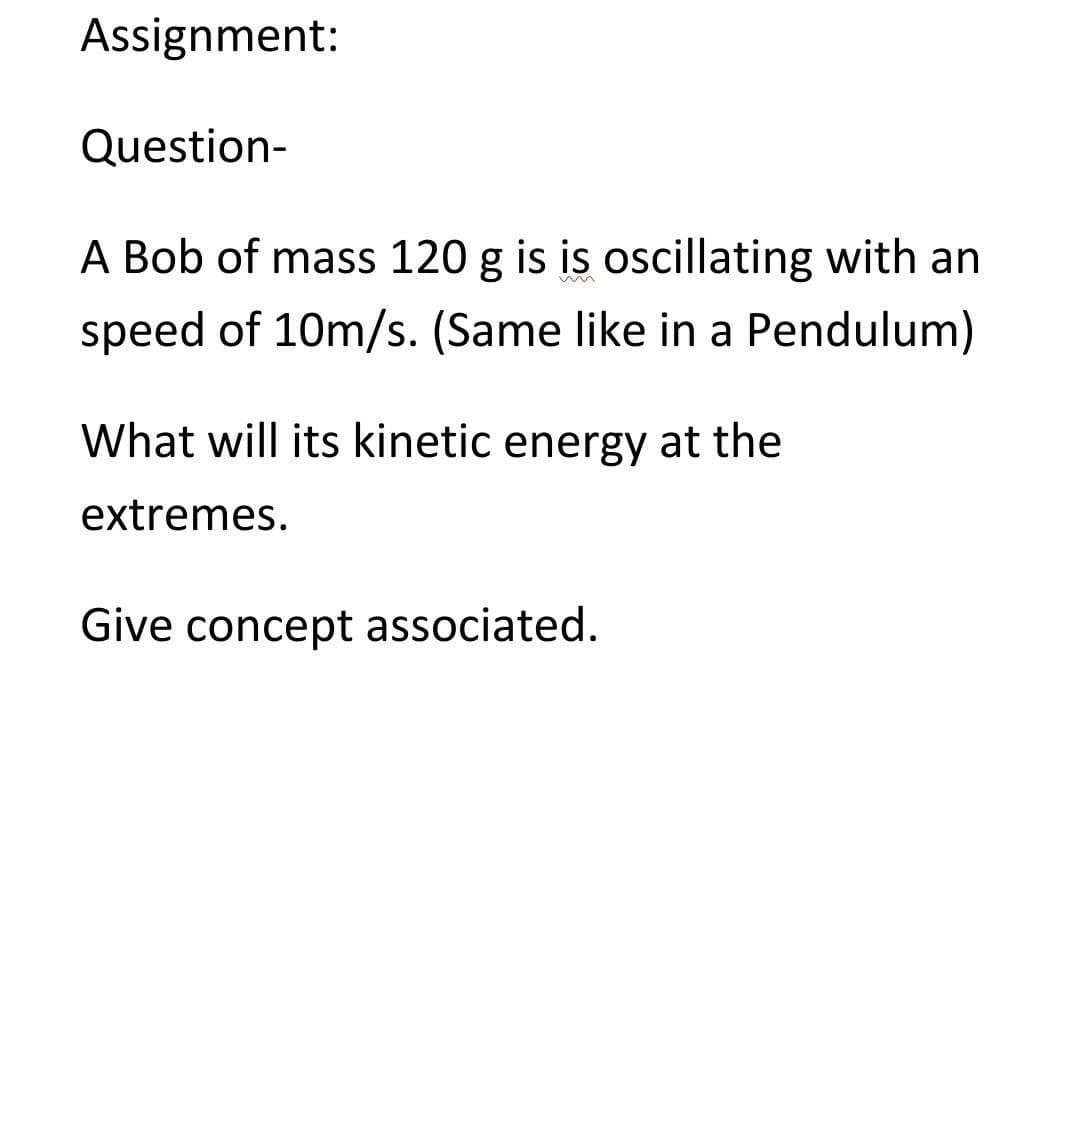 Assignment:
Question-
A Bob of mass 120 g is is oscillating with an
speed of 10m/s. (Same like in a Pendulum)
What will its kinetic energy at the
extremes.
Give concept associated.
